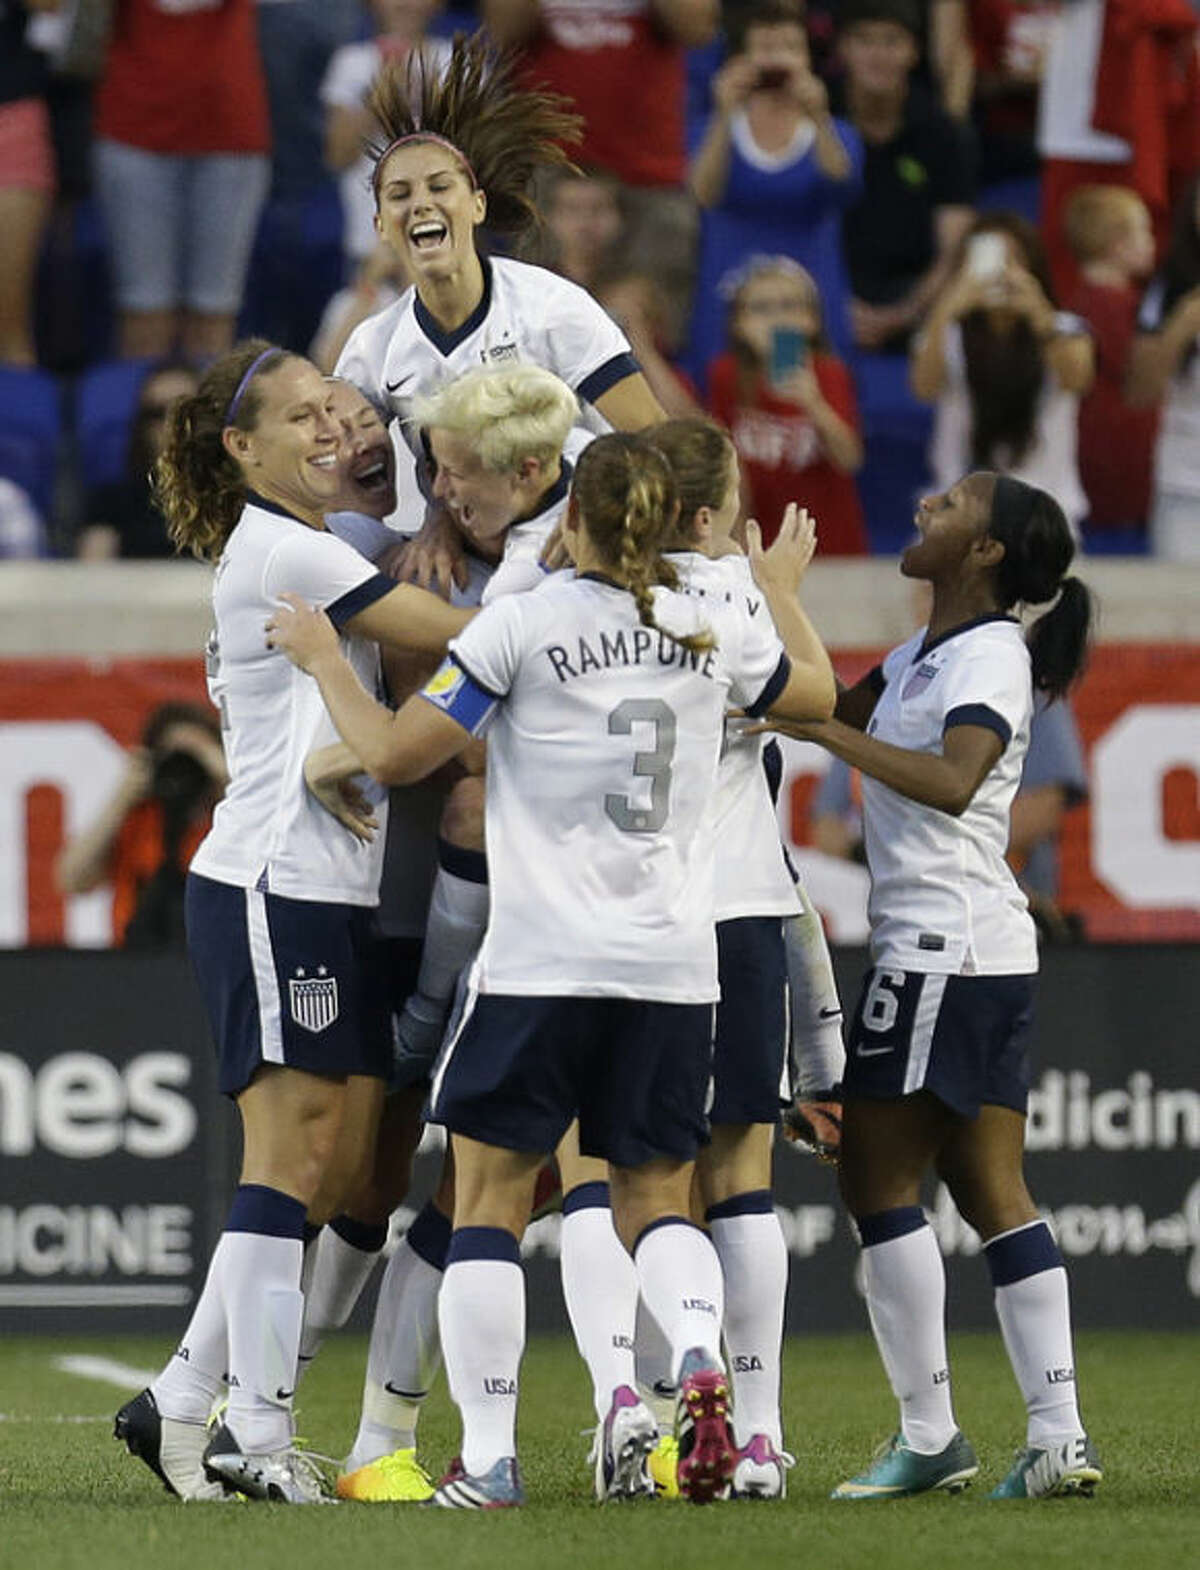 United States women soccer players mob Abby Wambach after she scored a goal against South Korea during the first half of an international friendly soccer match at Red Bull Arena, Thursday, June 20, 2013, in Harrison, N.J. With the goal, Wambach broke Mia Hamm's national goal-scoring record. (AP Photo/Julio Cortez)